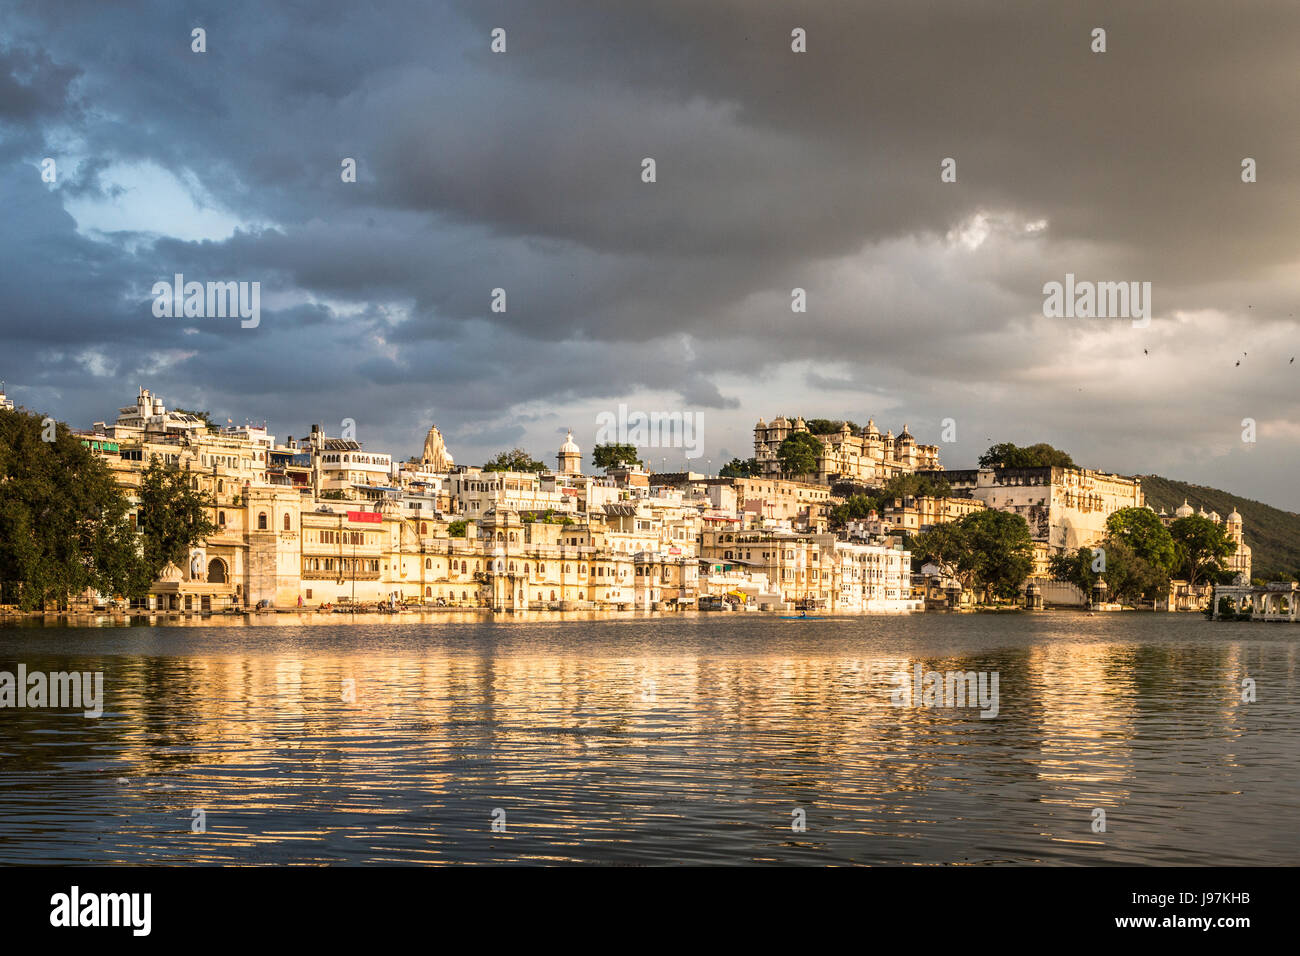 Sunset over lake Pichola with Udaipur old town lakefront and the City Palace in Rajasthan, India Stock Photo